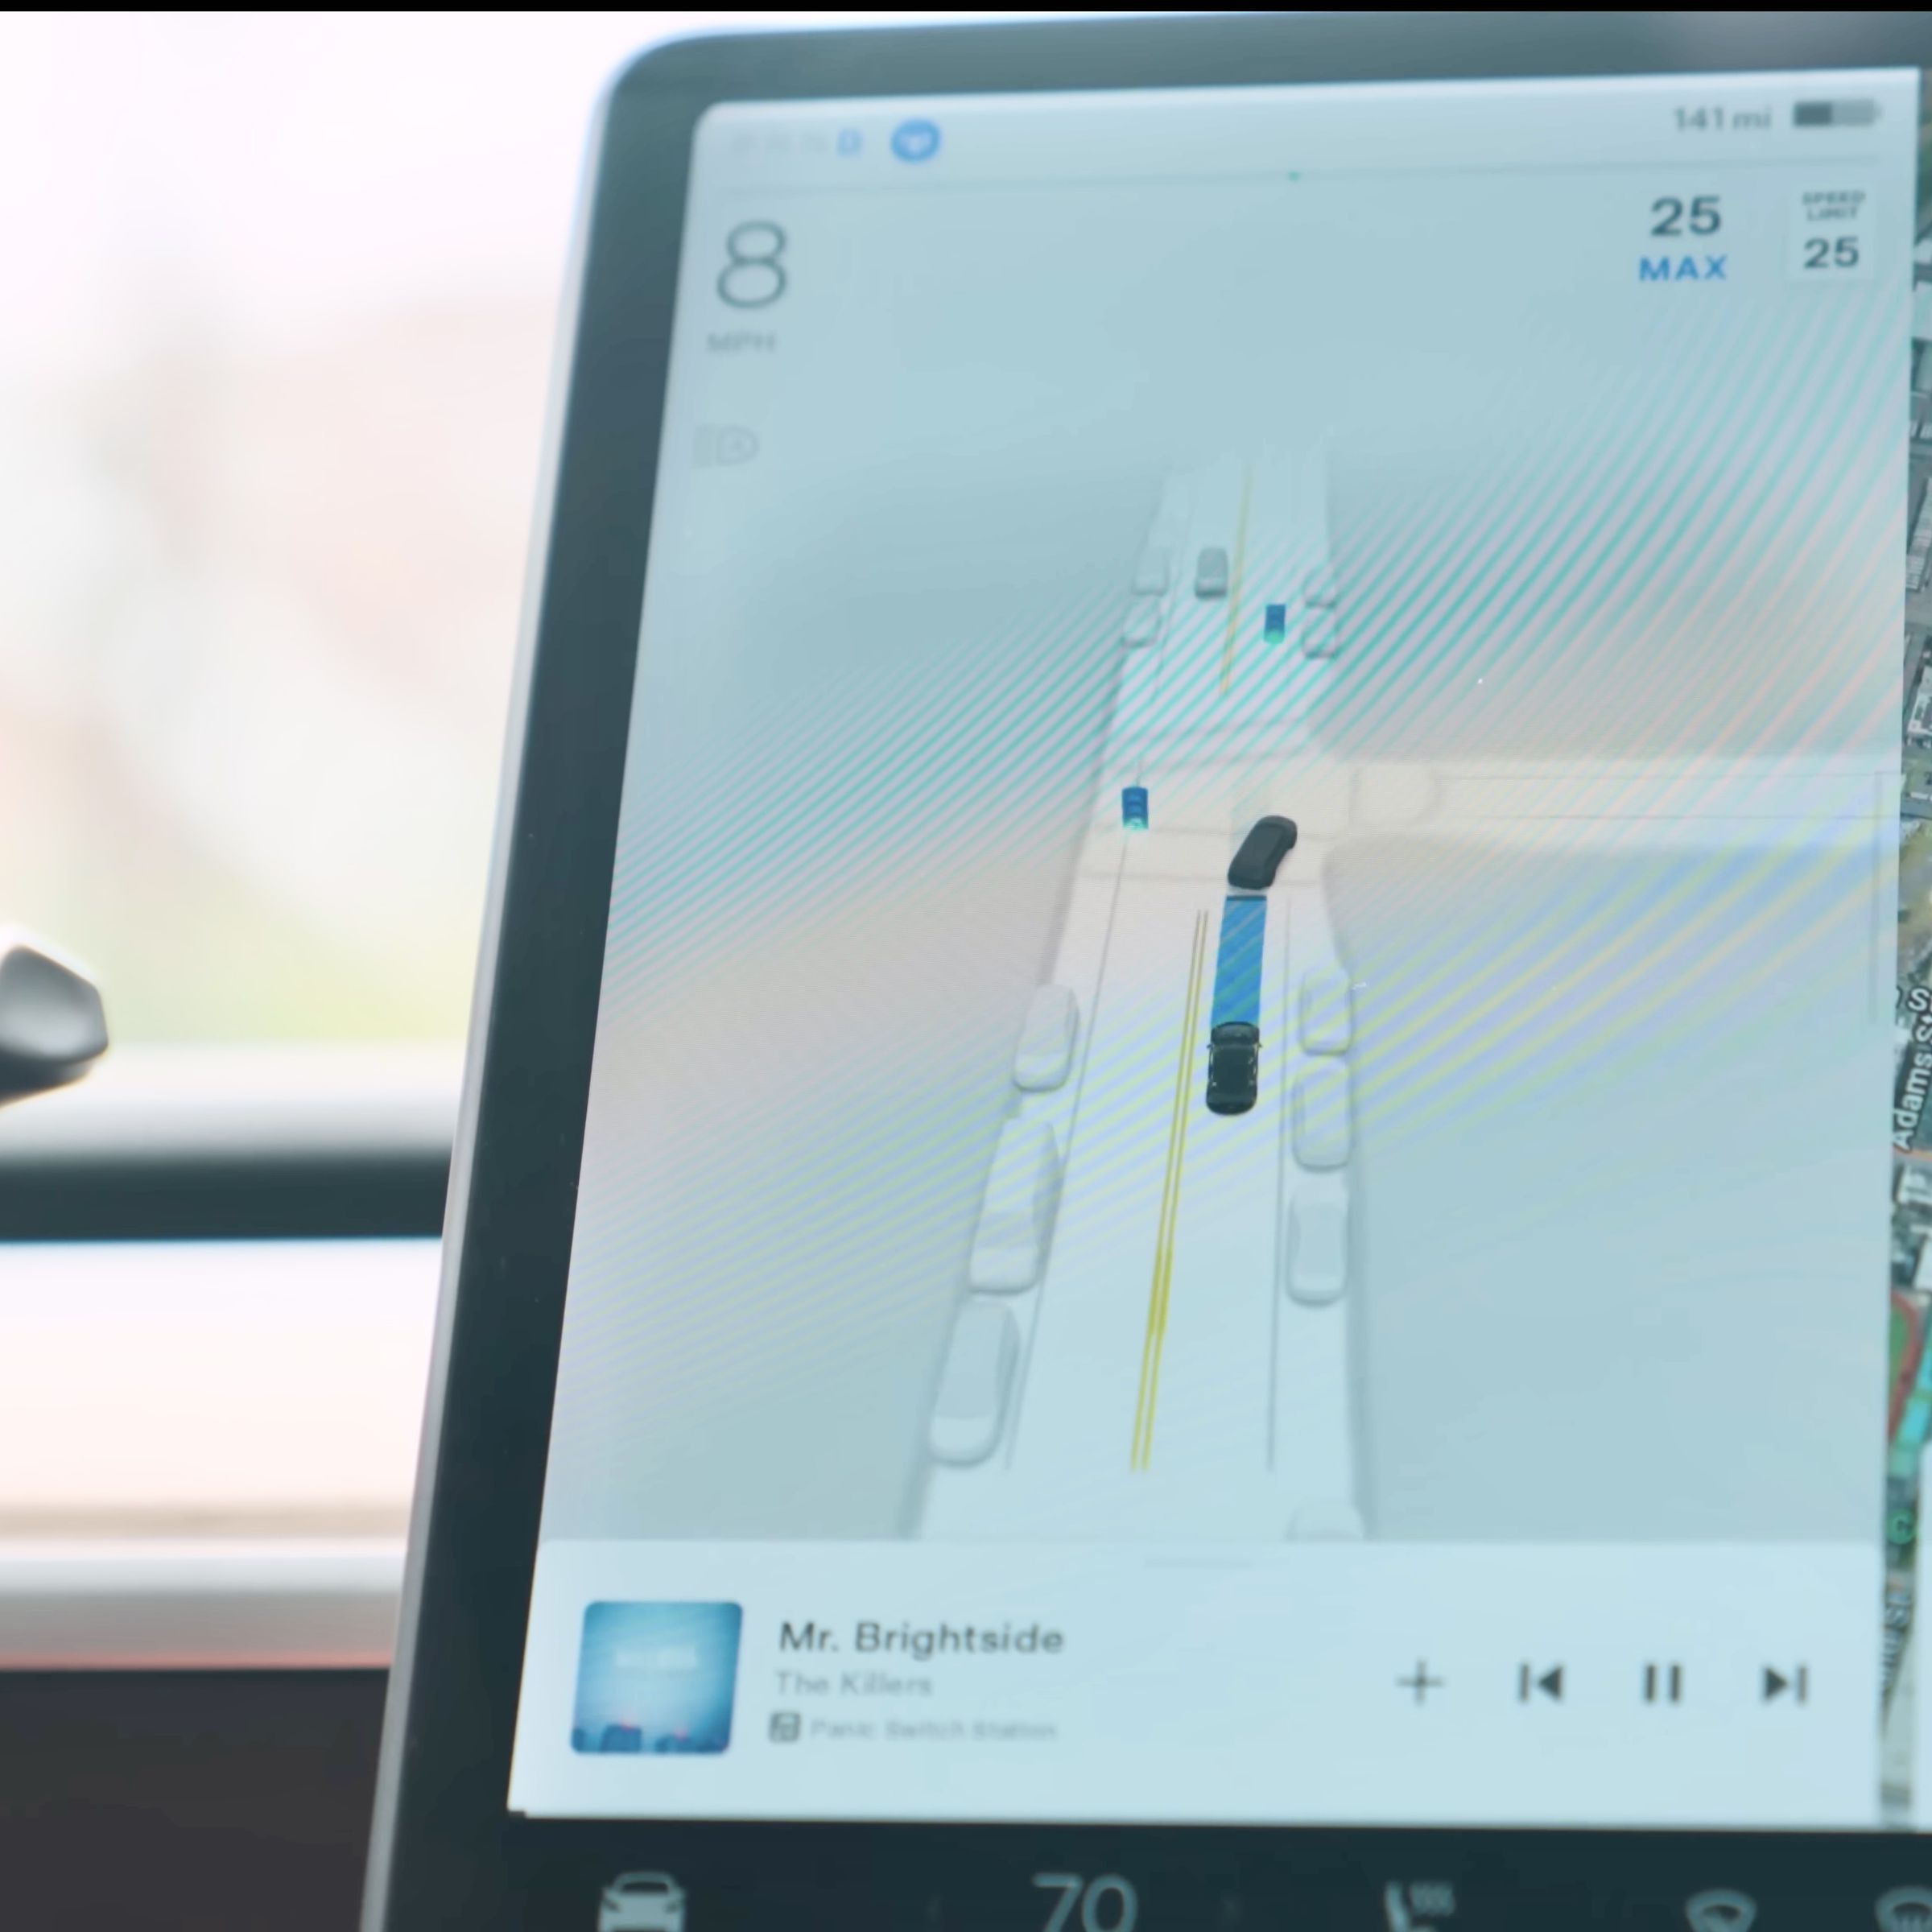 Left side of Tesla Model 3 main screen showing a computer-generated image of an intersection with cars parked on the sides and the Model 3 following another car